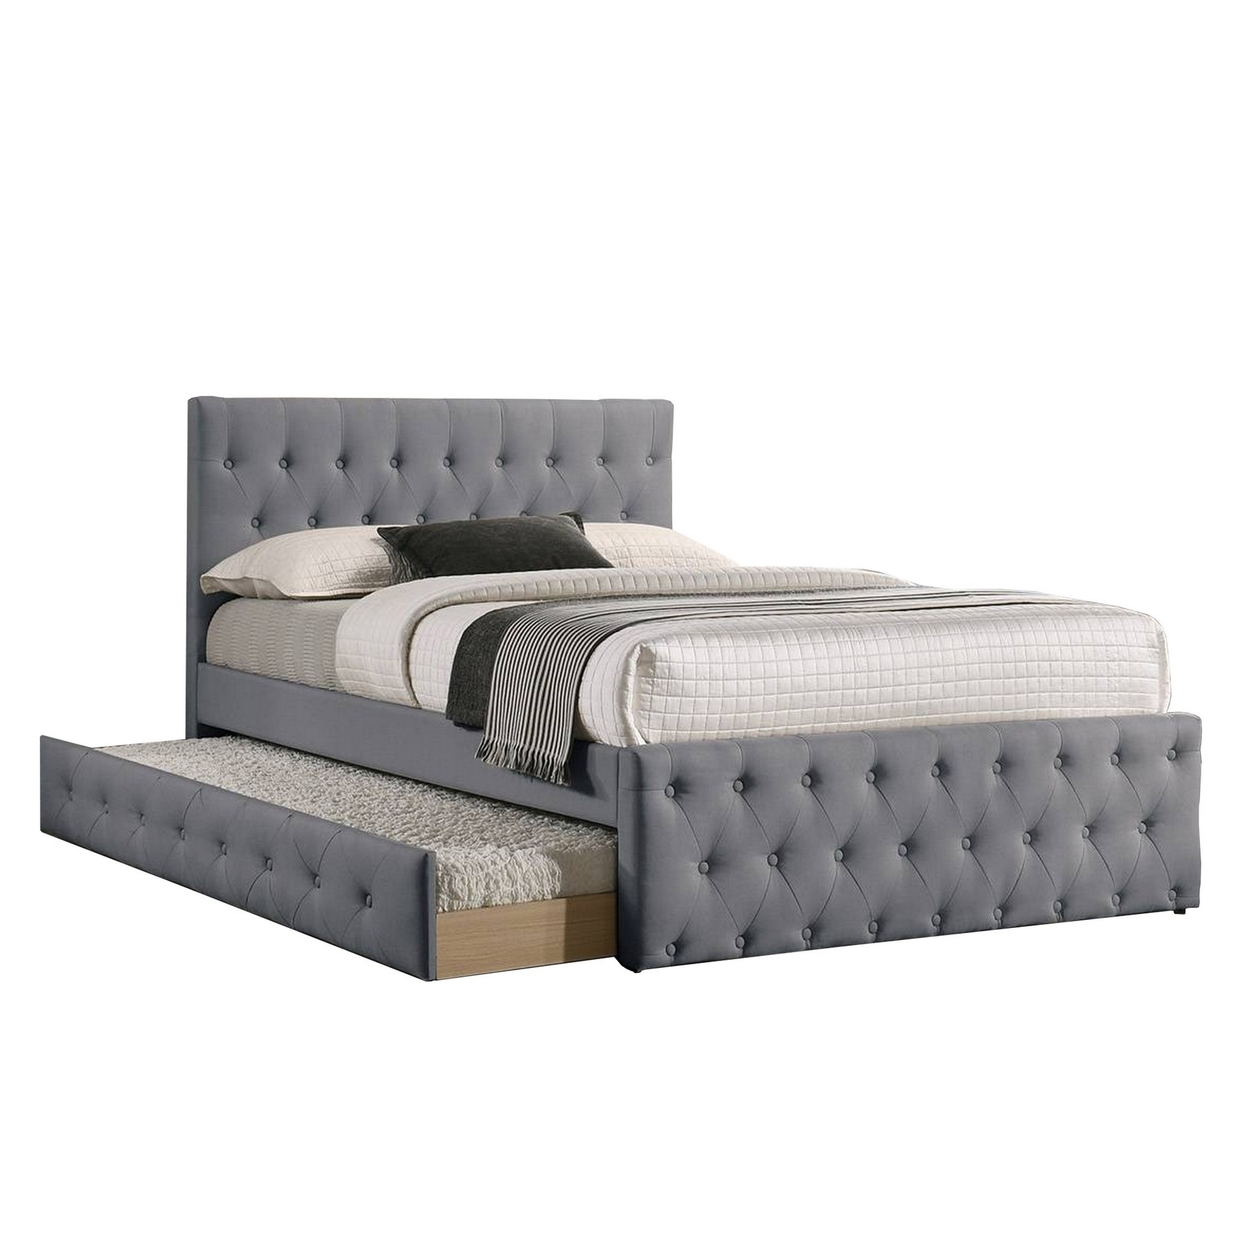 Nek Wood Twin Size Upholstered Bed With Trundle, Tufted Gray Burlap- Saltoro Sherpi